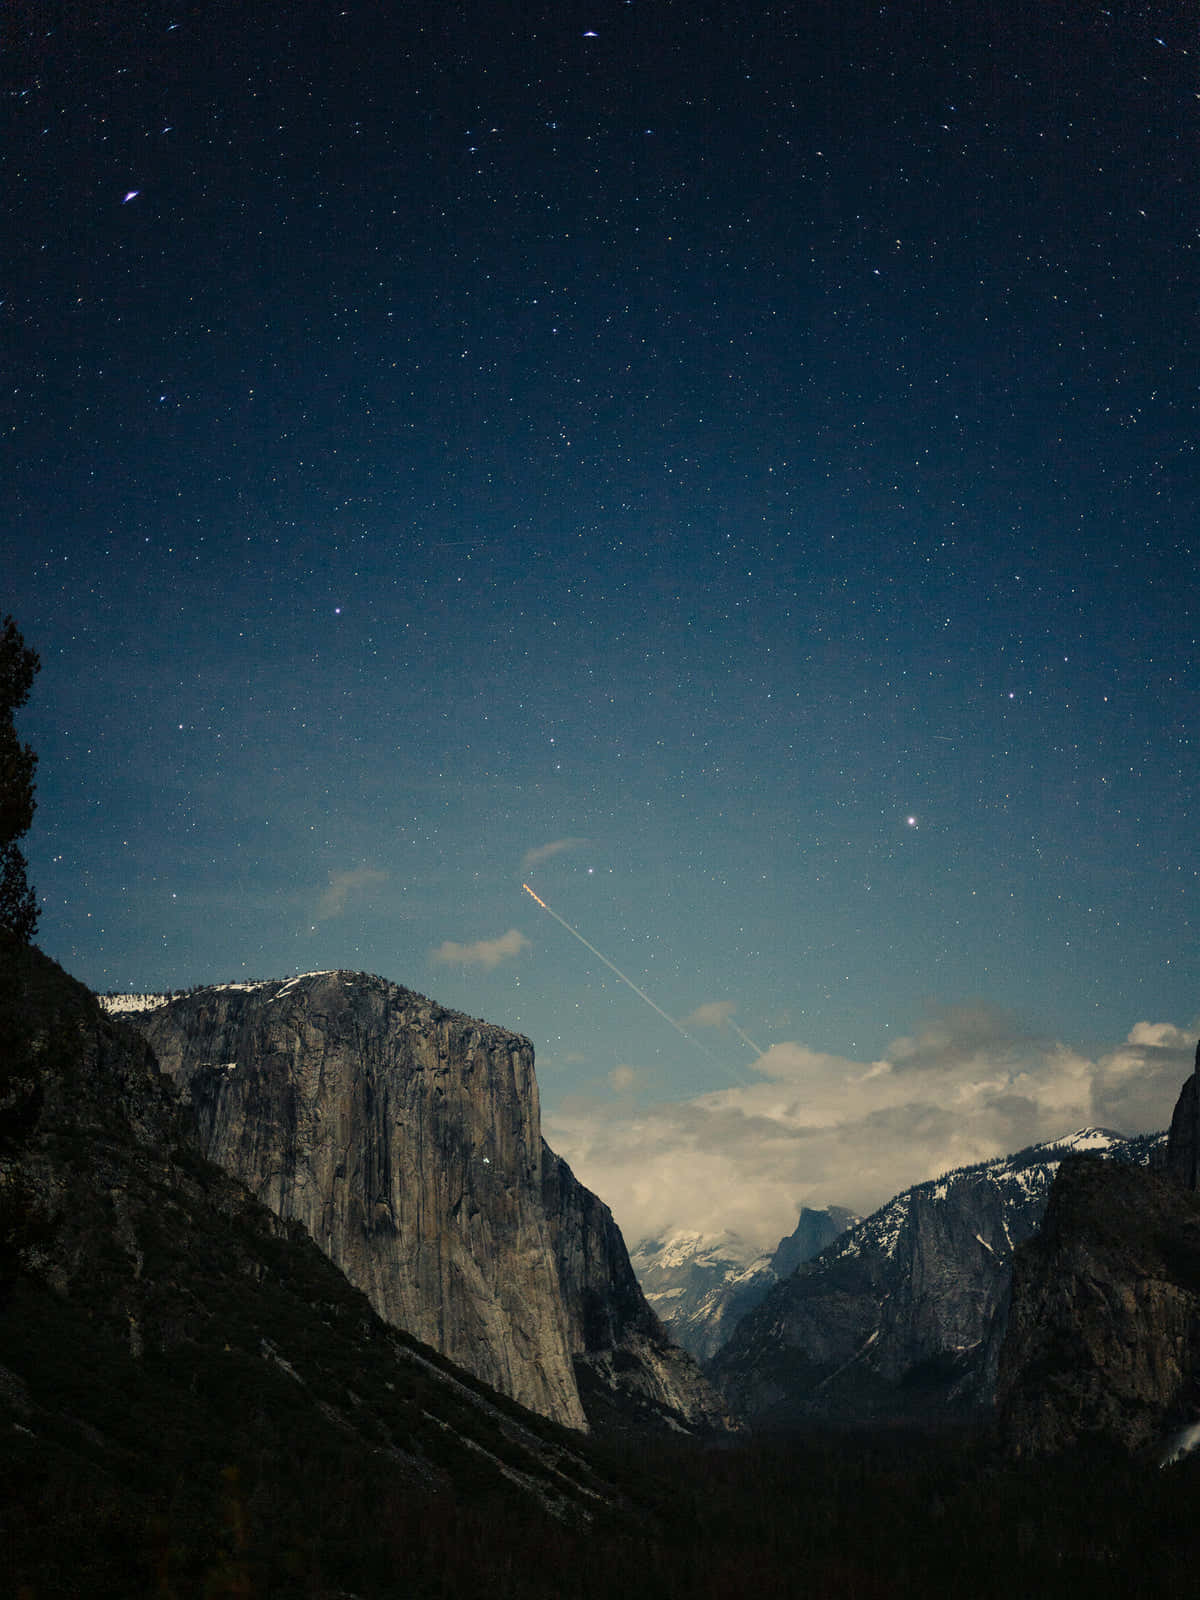 A Mountain Range With A Sky Full Of Stars